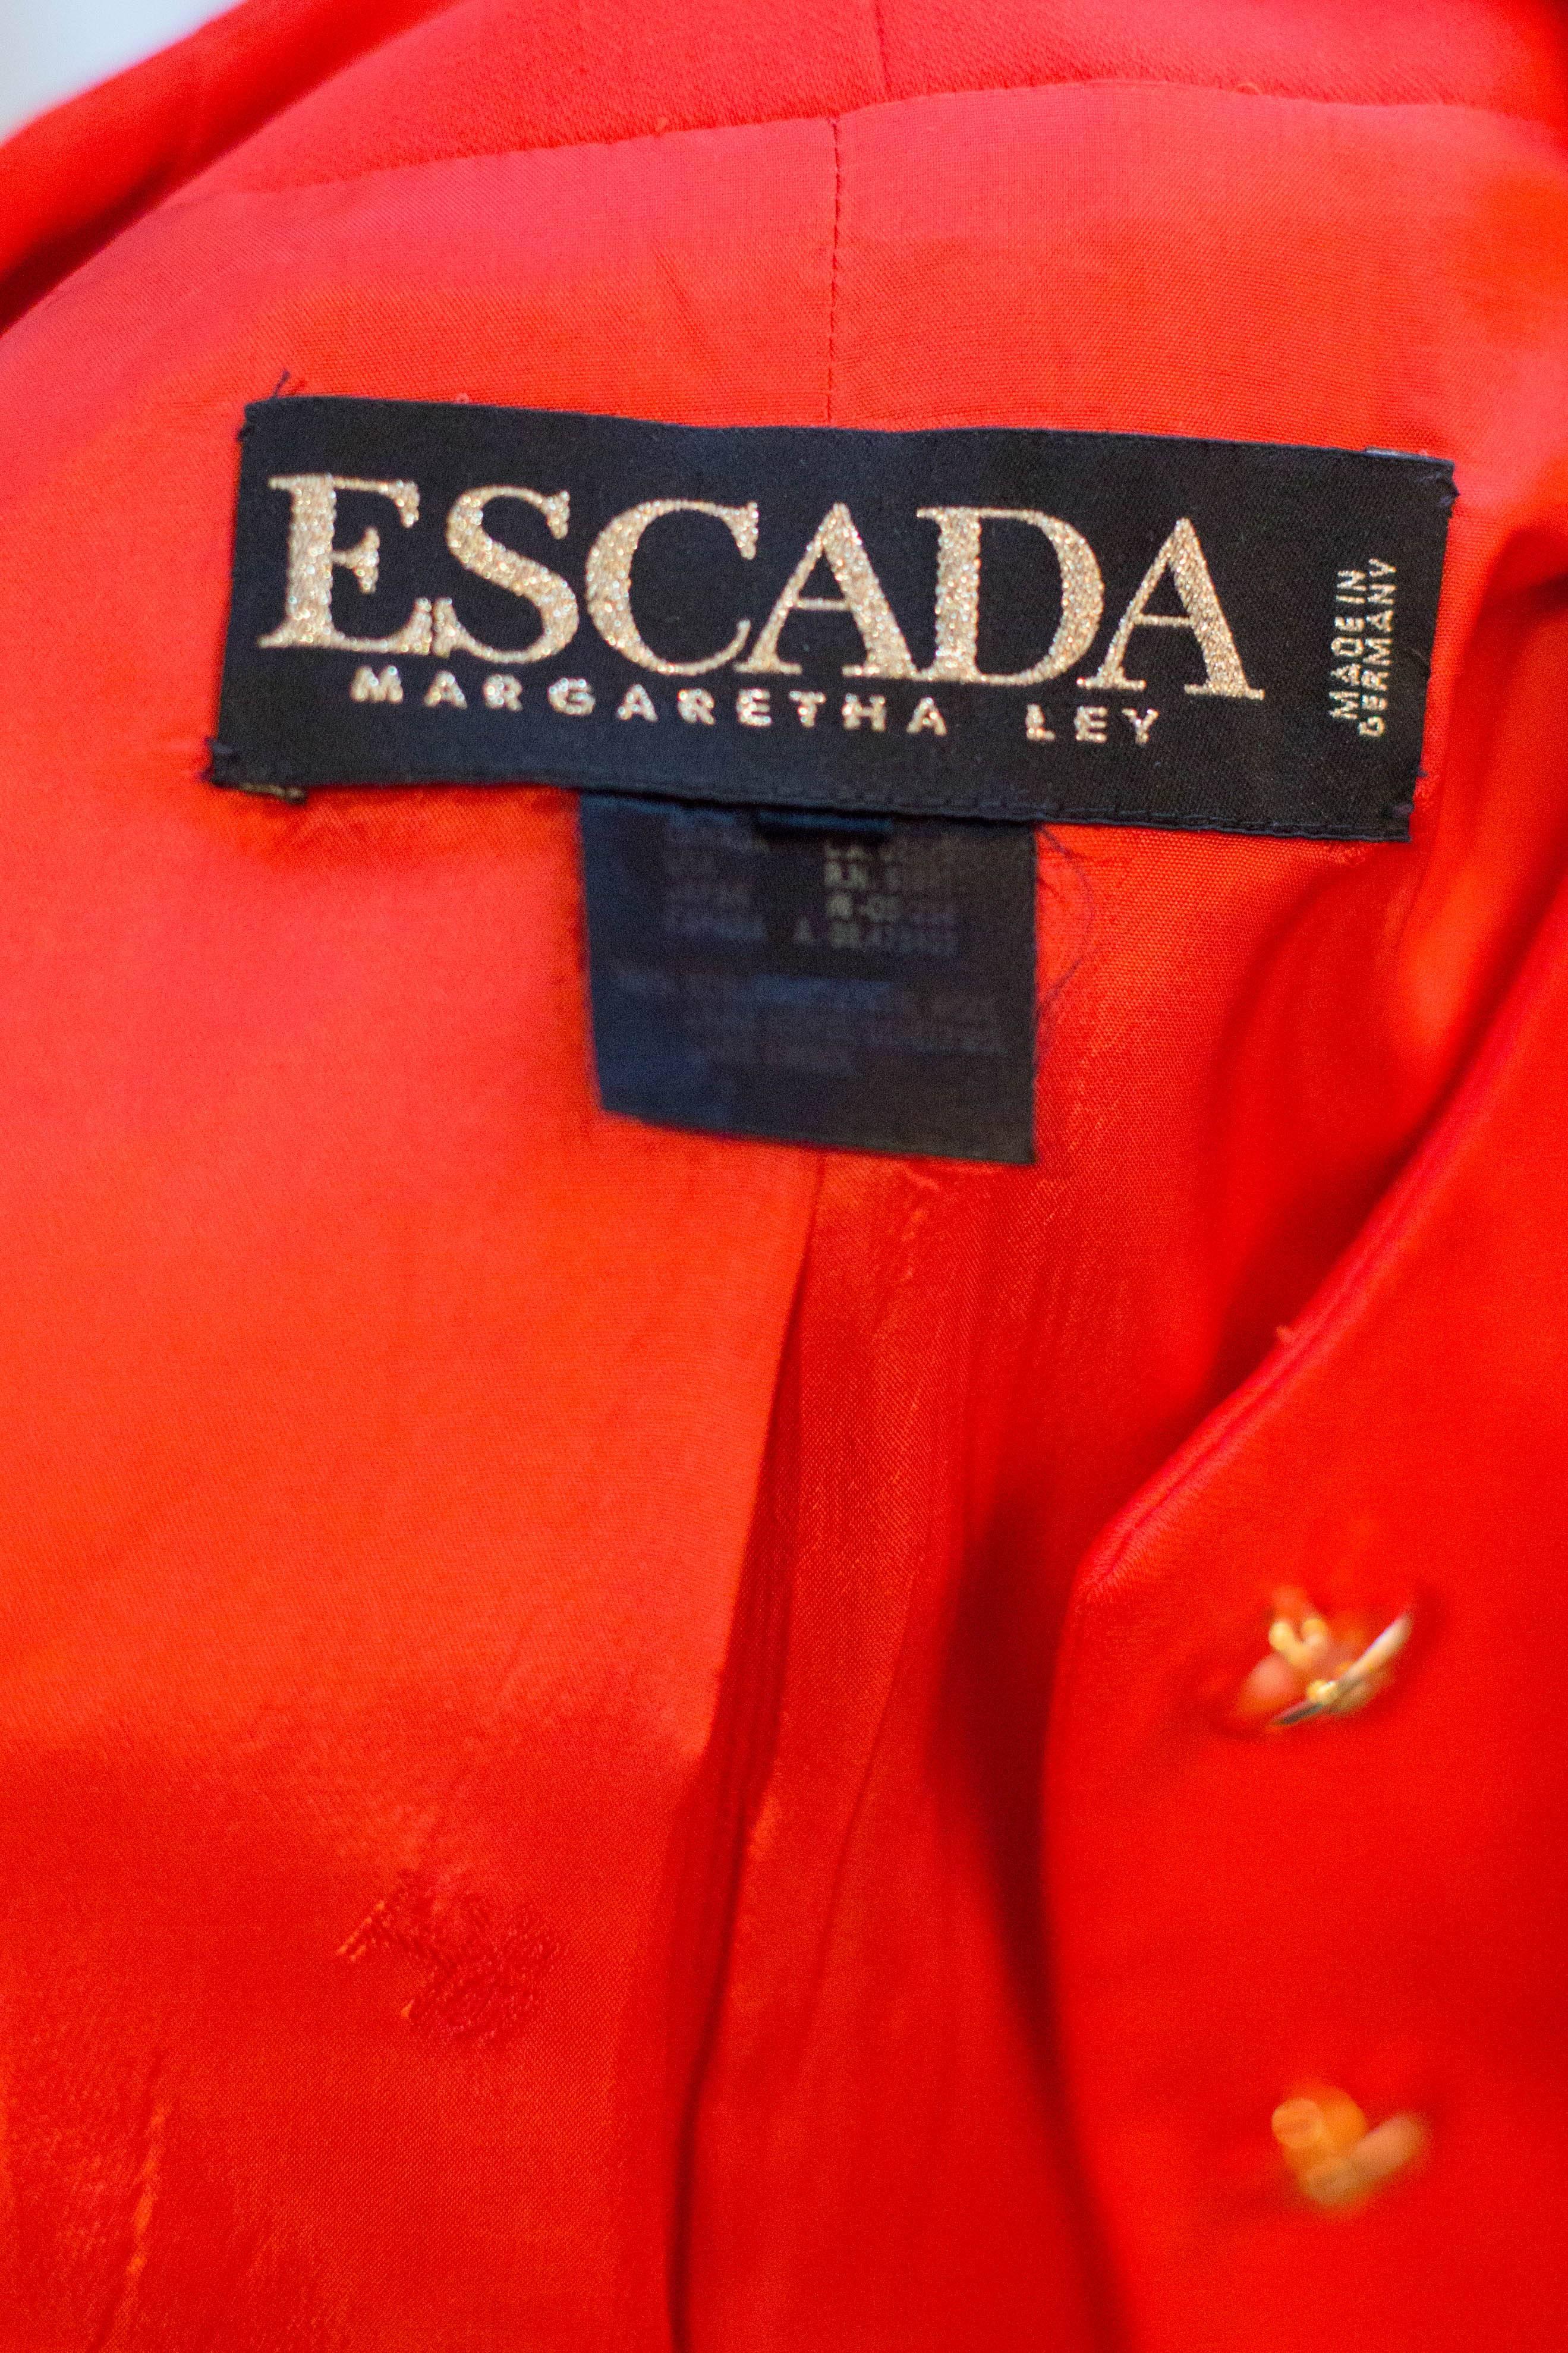 1990s Escada by Margaretha Ley Pure Wool Red Jacket  For Sale 3